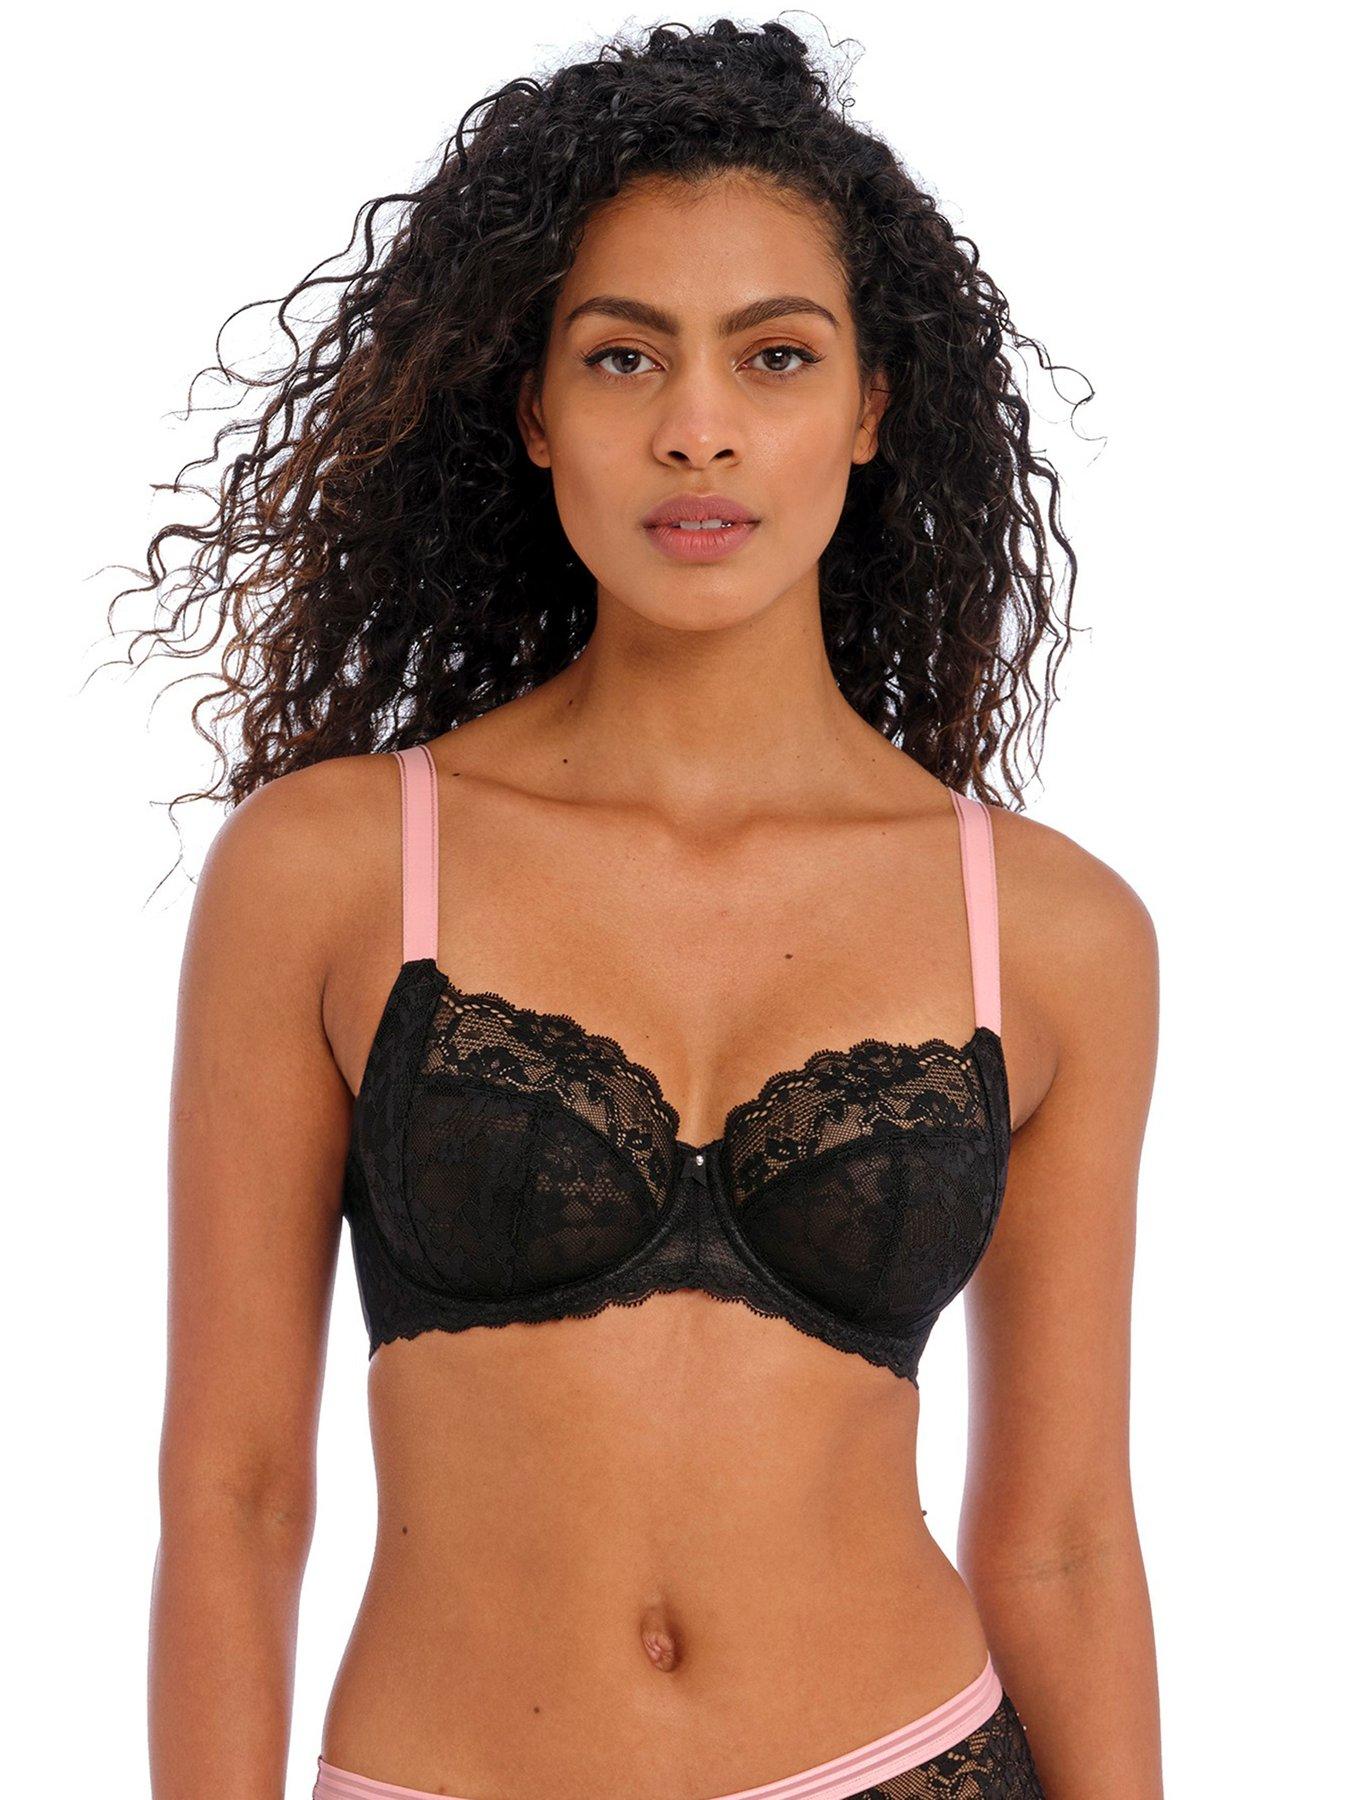 Buy Latte Nude Recycled Lace Full Cup Bra 32G, Bras